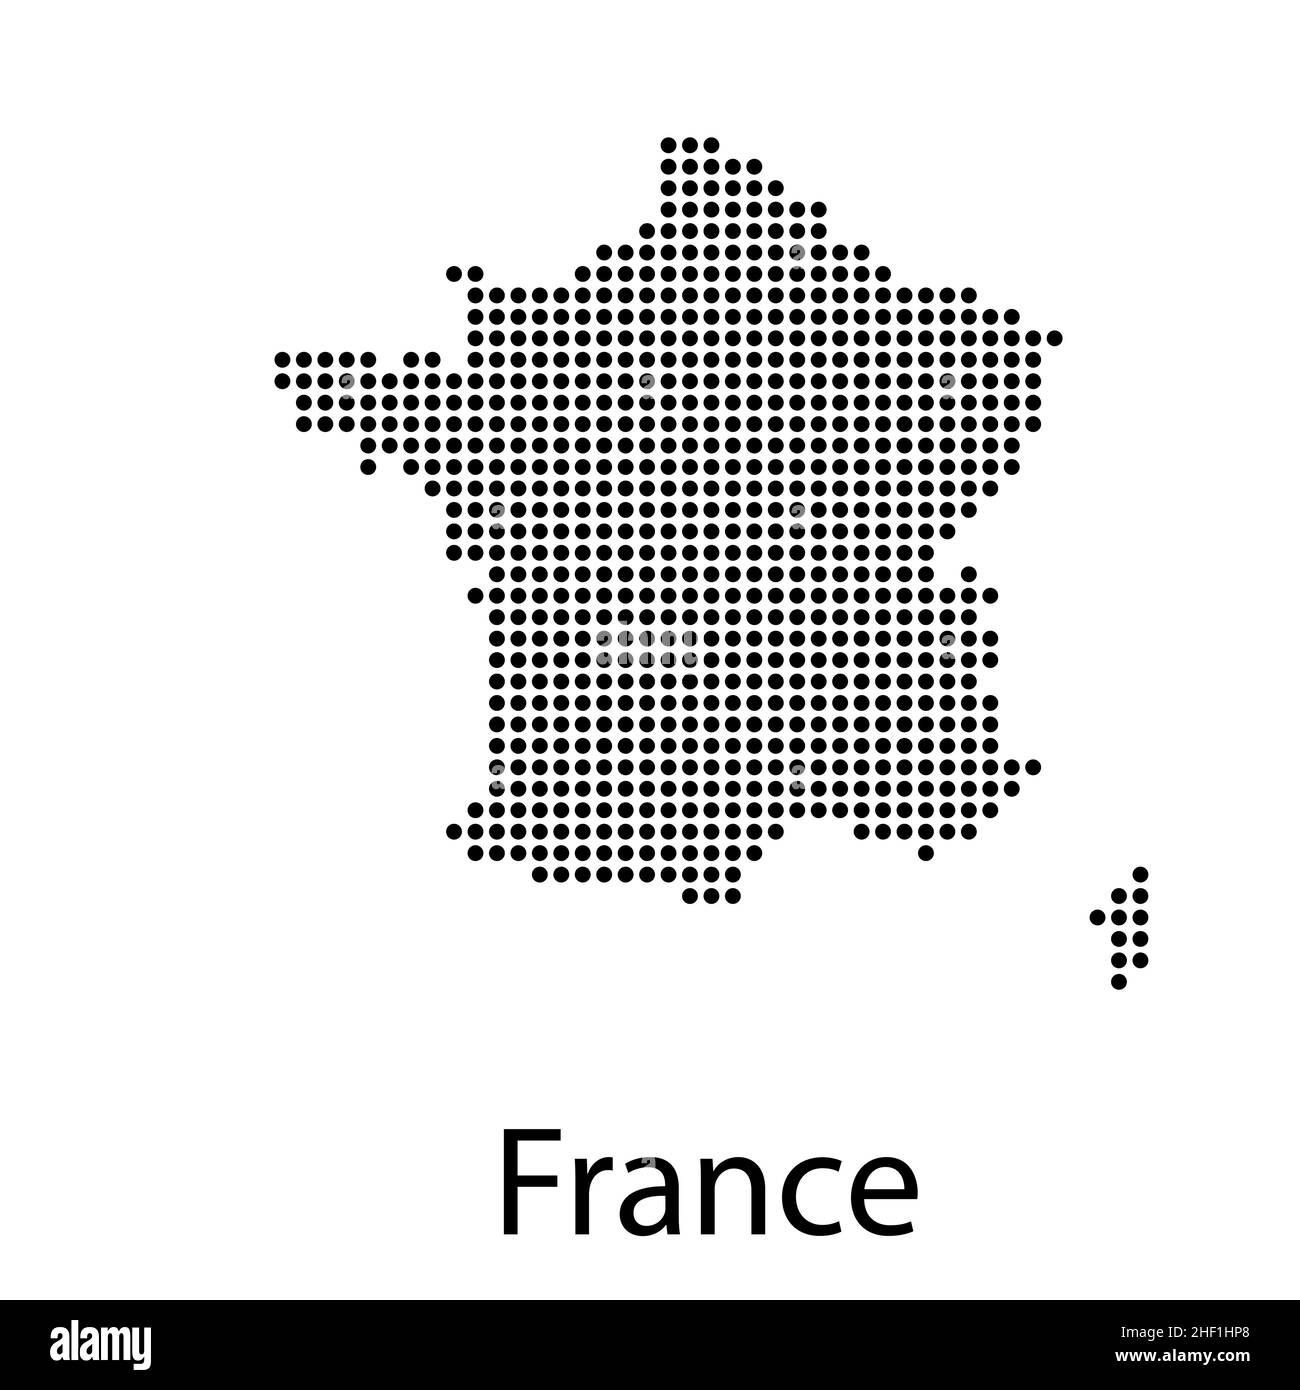 Vector map of France with regions and towns vector illustration Stock Vector